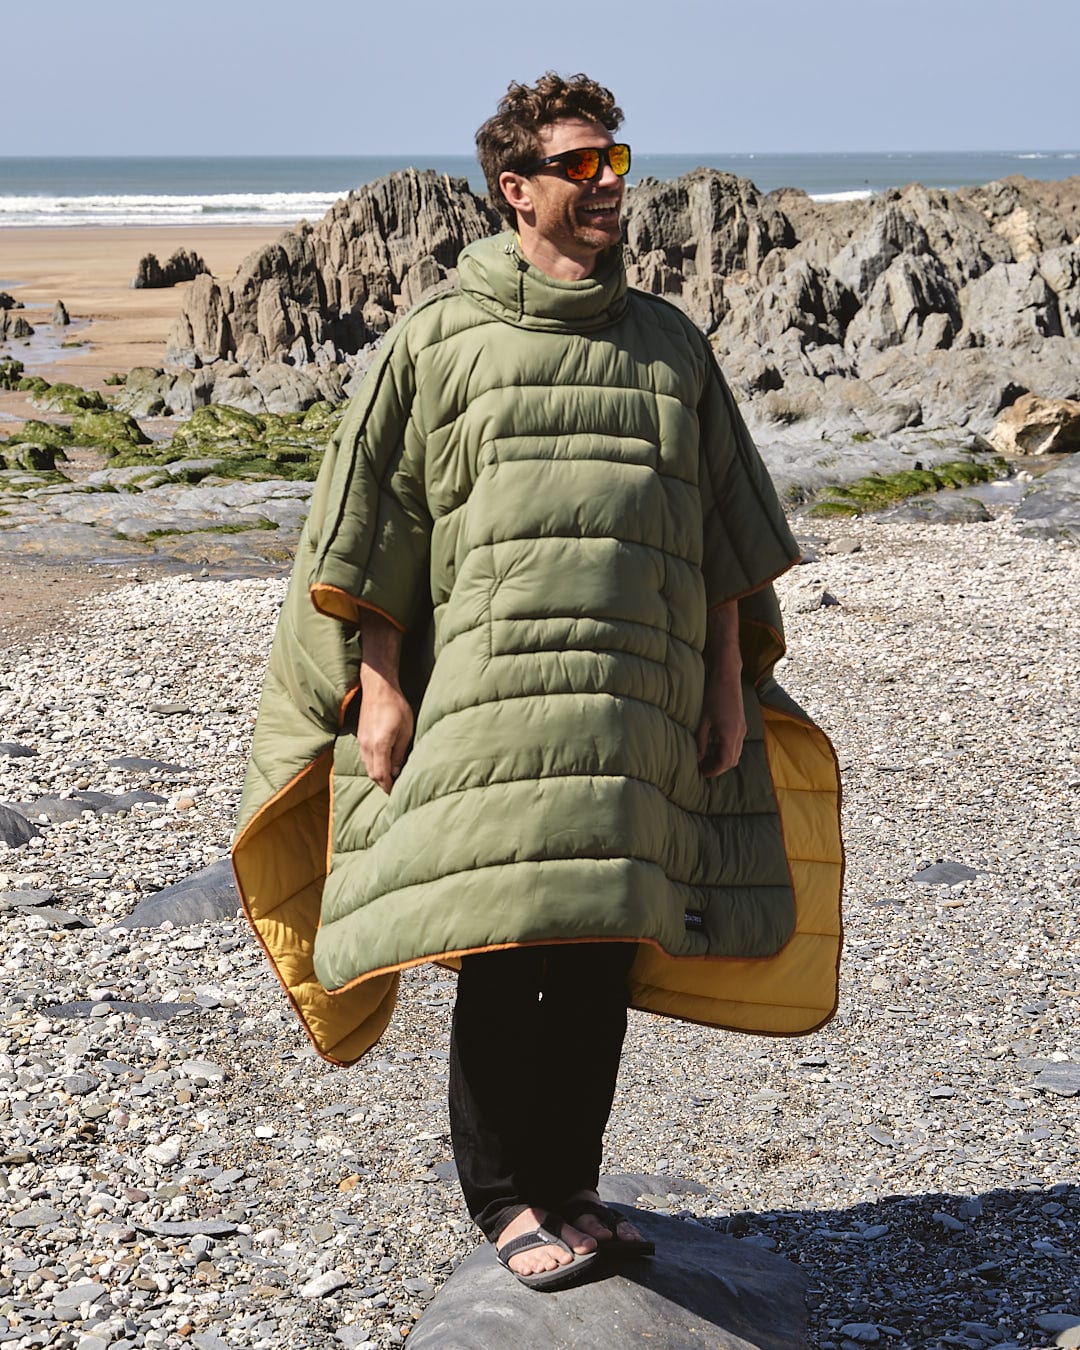 A man in a yellow Sunset - Packable Reversible Poncho by Saltrock standing on a rock.